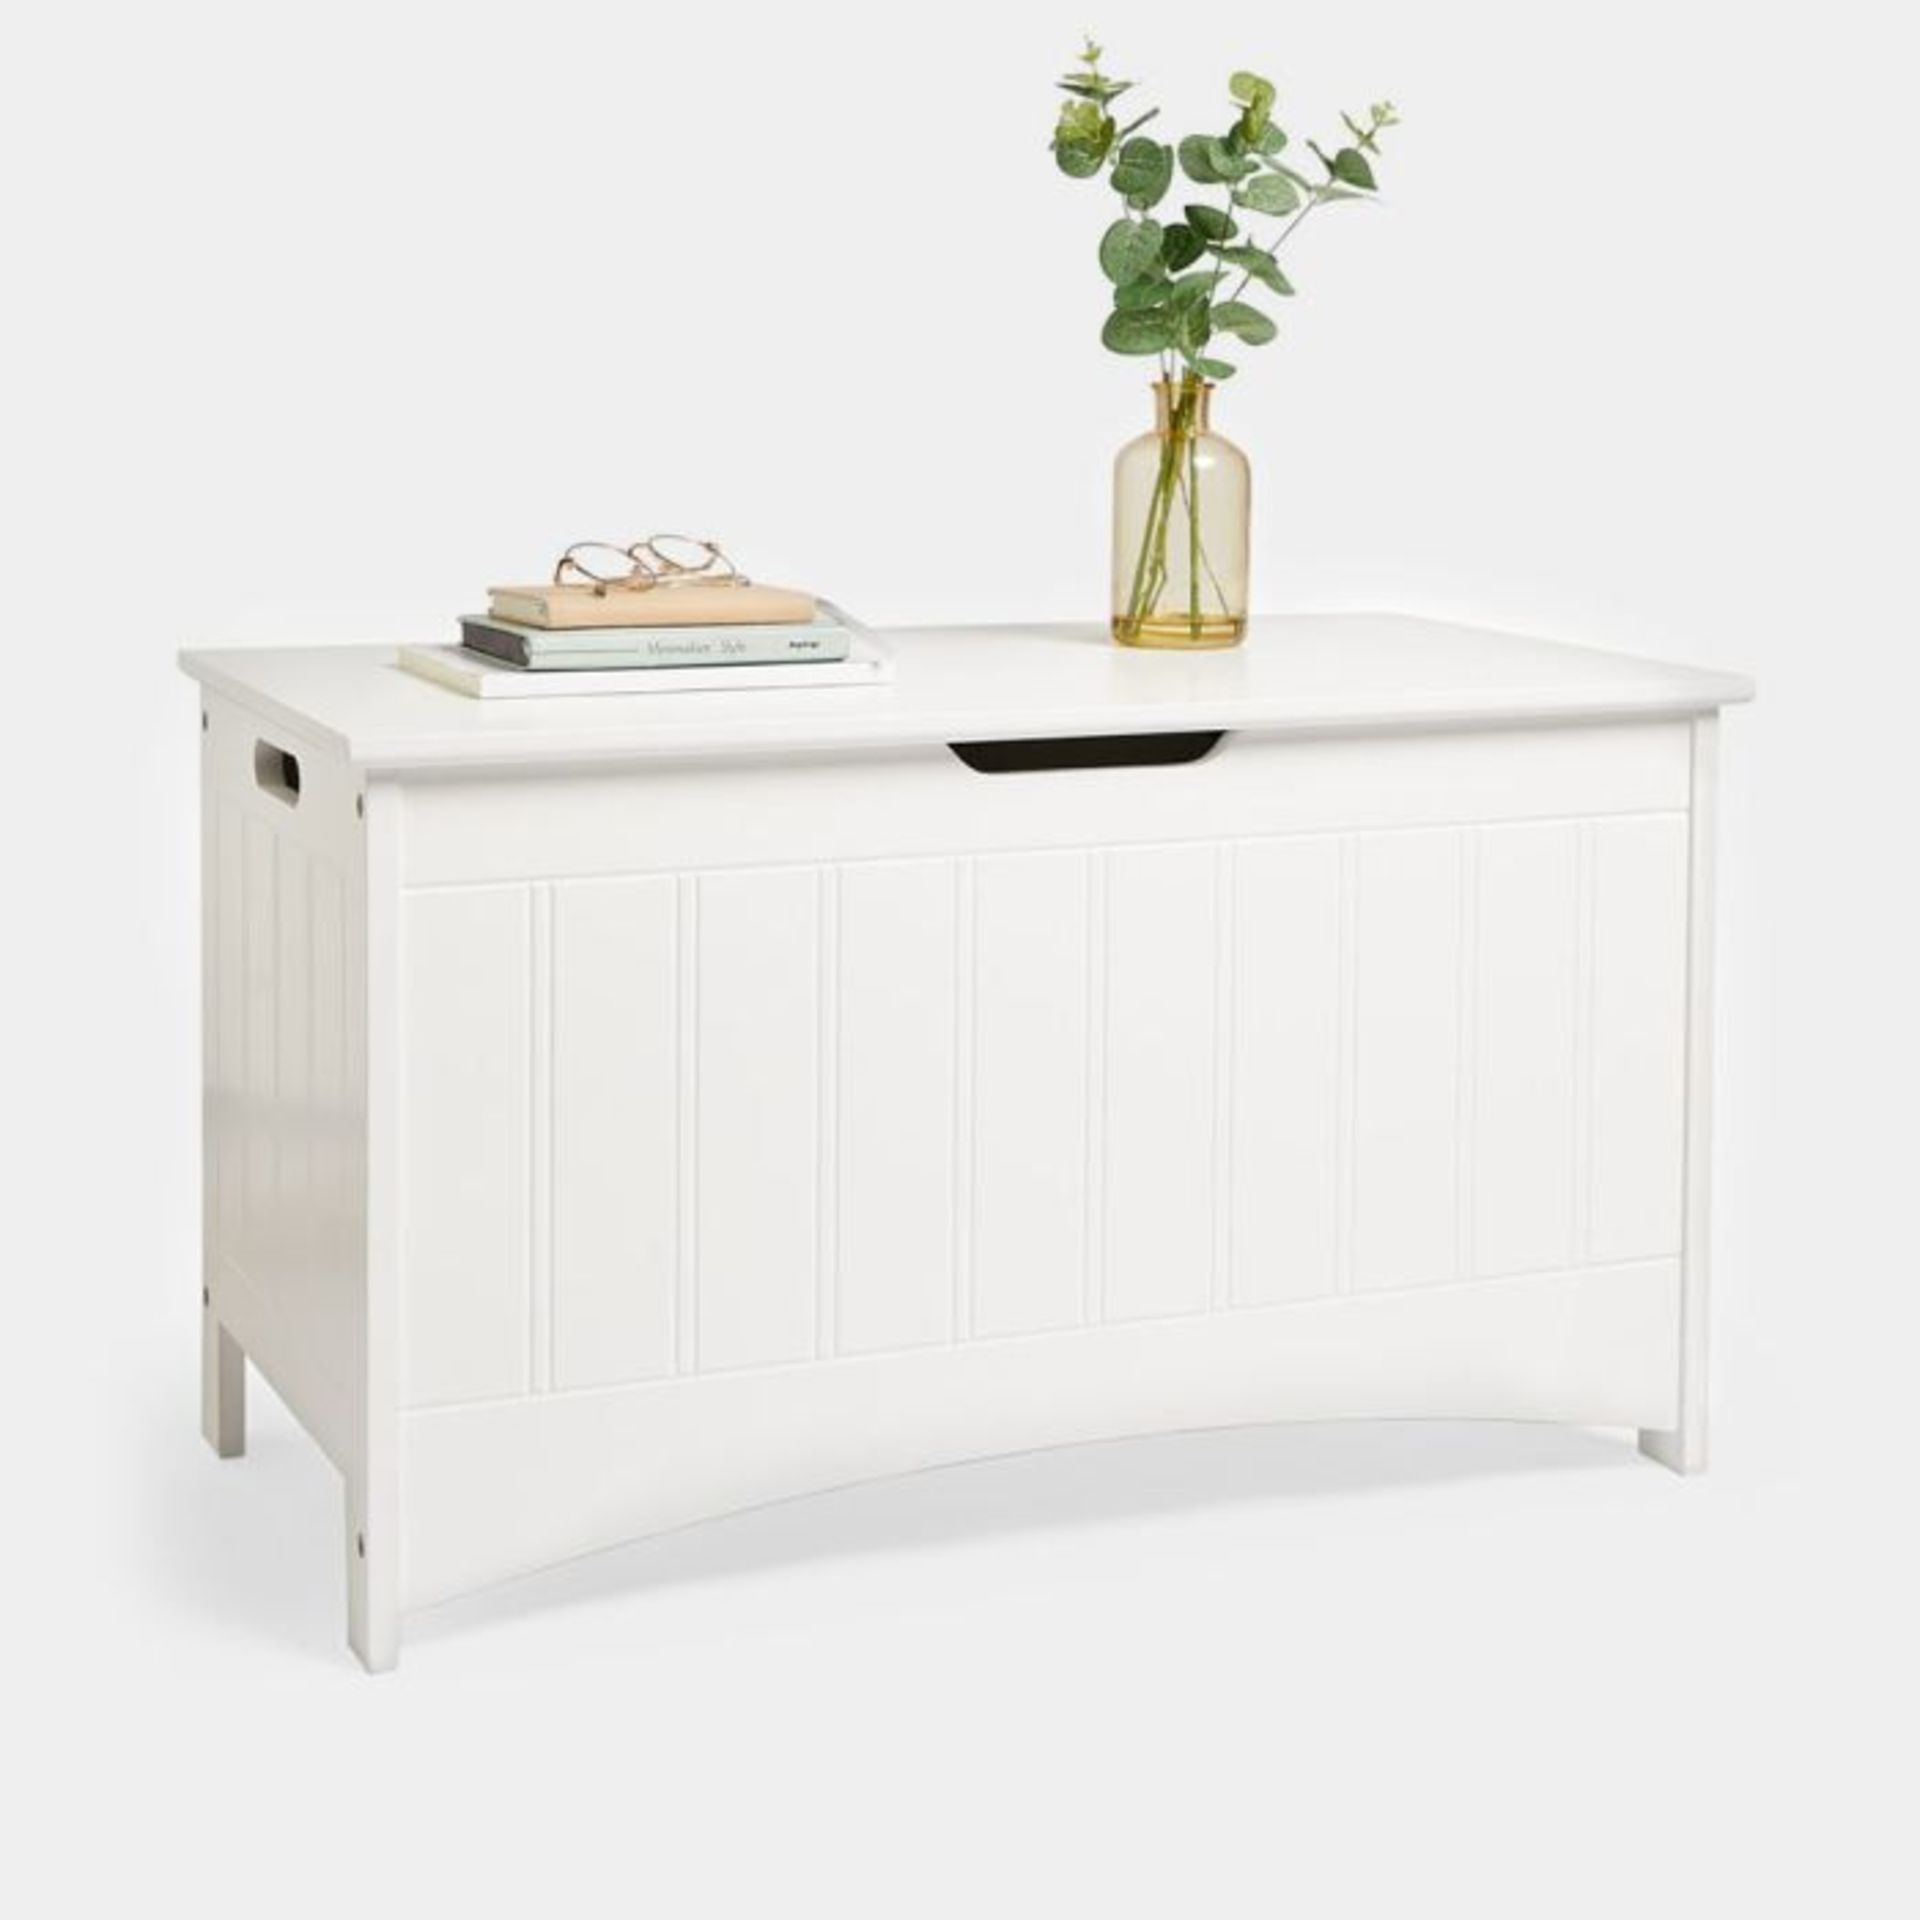 Holbrook White Storage Chest. -ER34. With a tongue-and-groove effect, the storage box has a